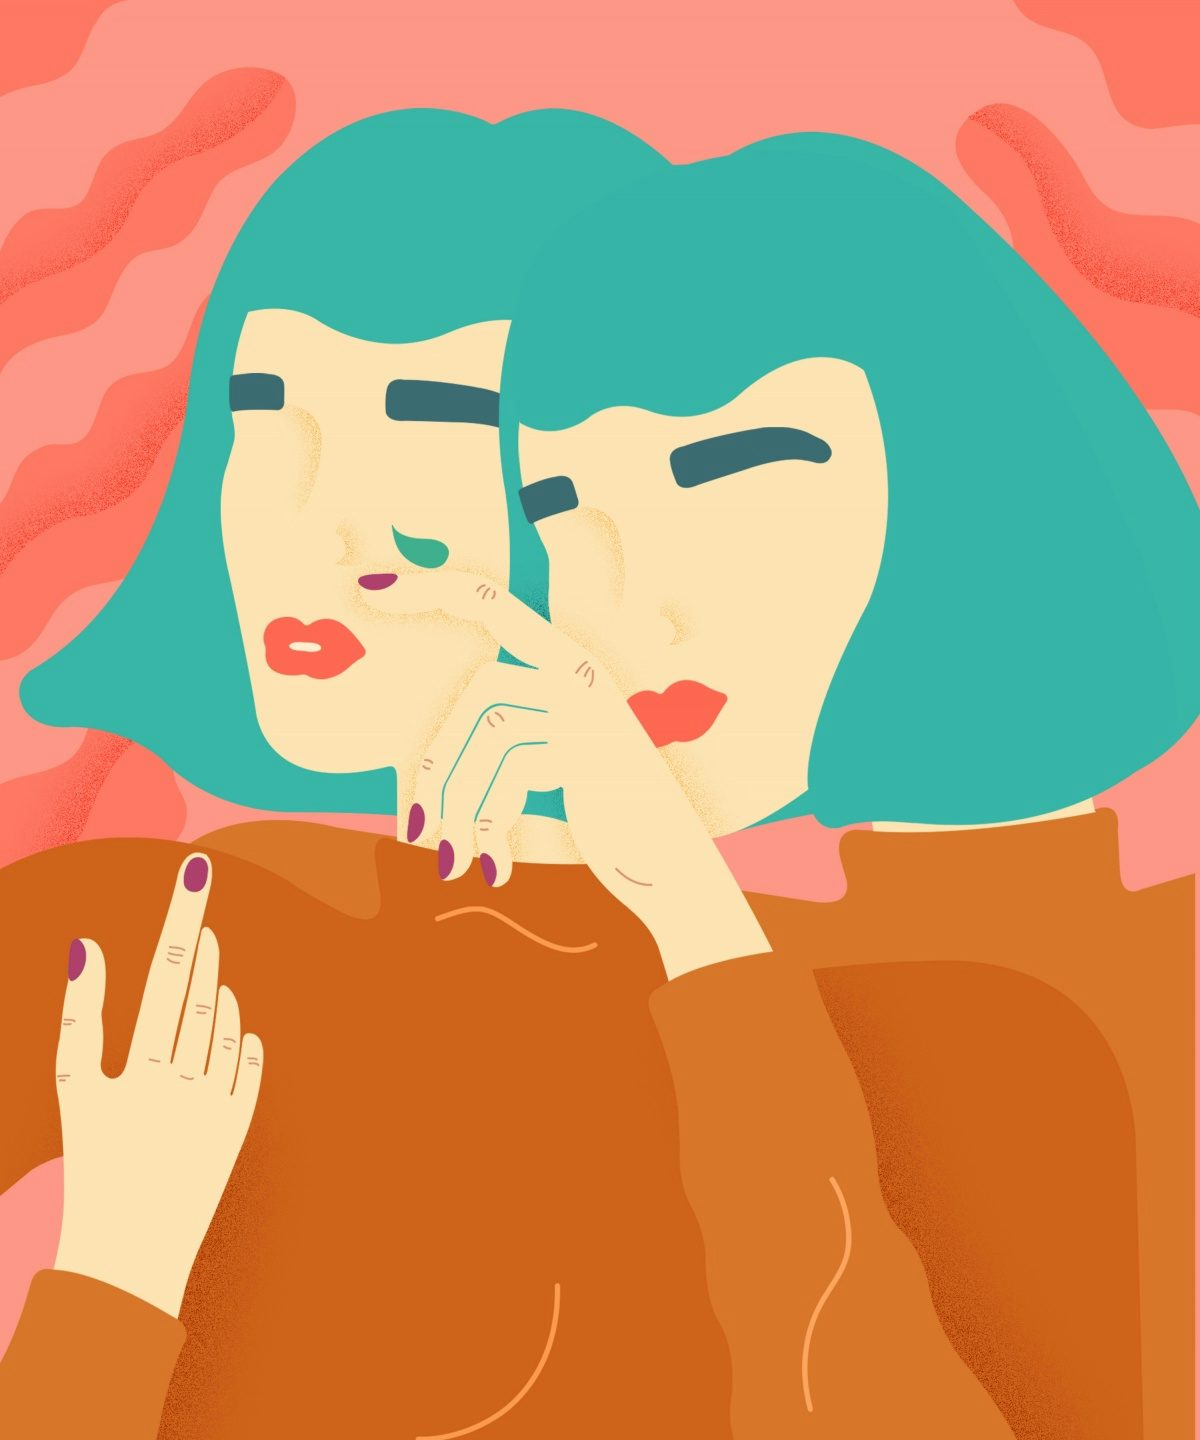 Illustration from a series focused on mental health, depression and anxiety for Refinery29 